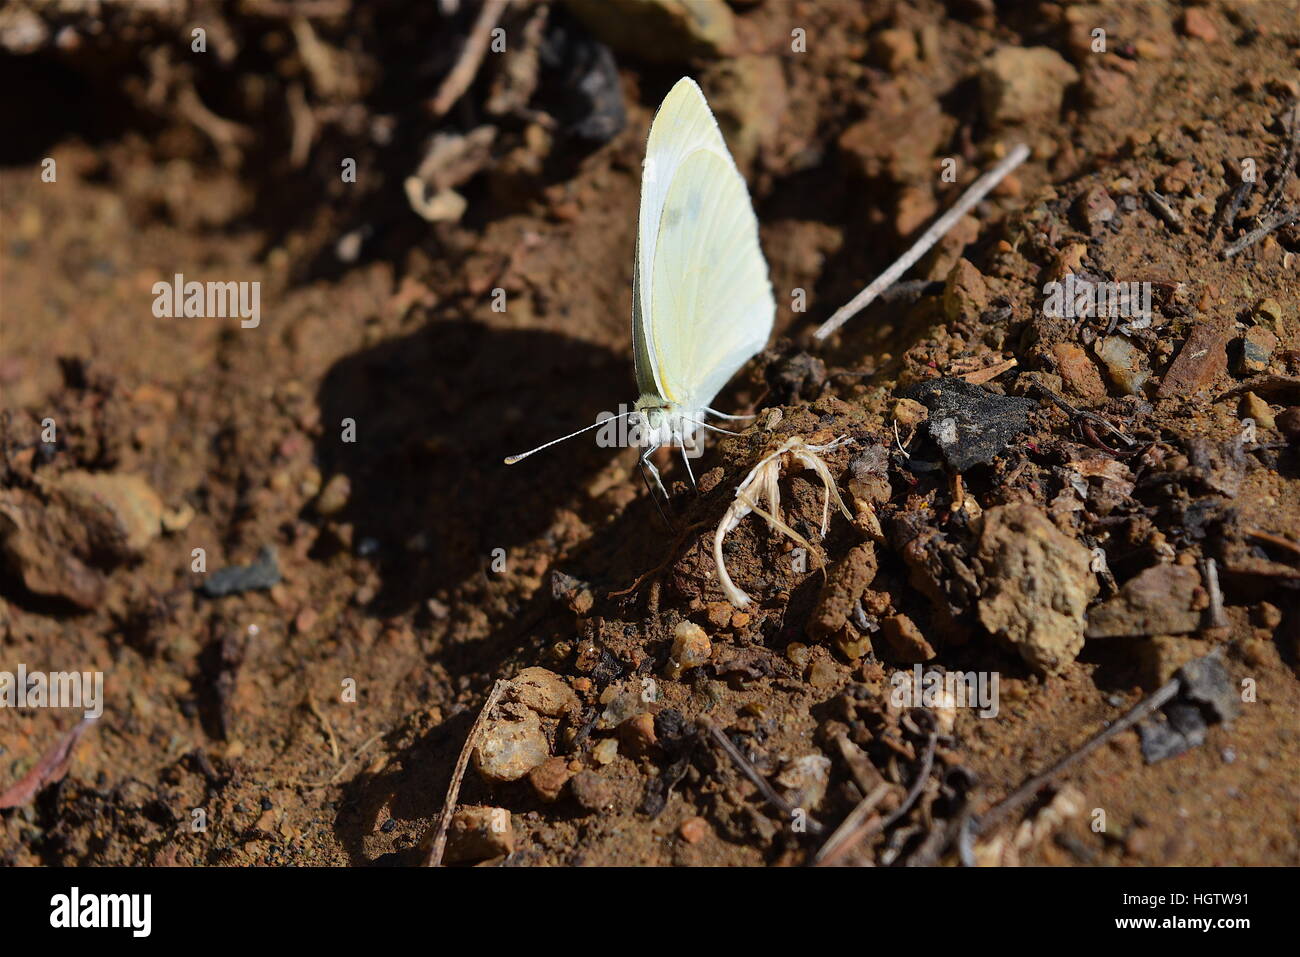 Cabbage white butterfly basking the sun, San Diego, California Stock Photo